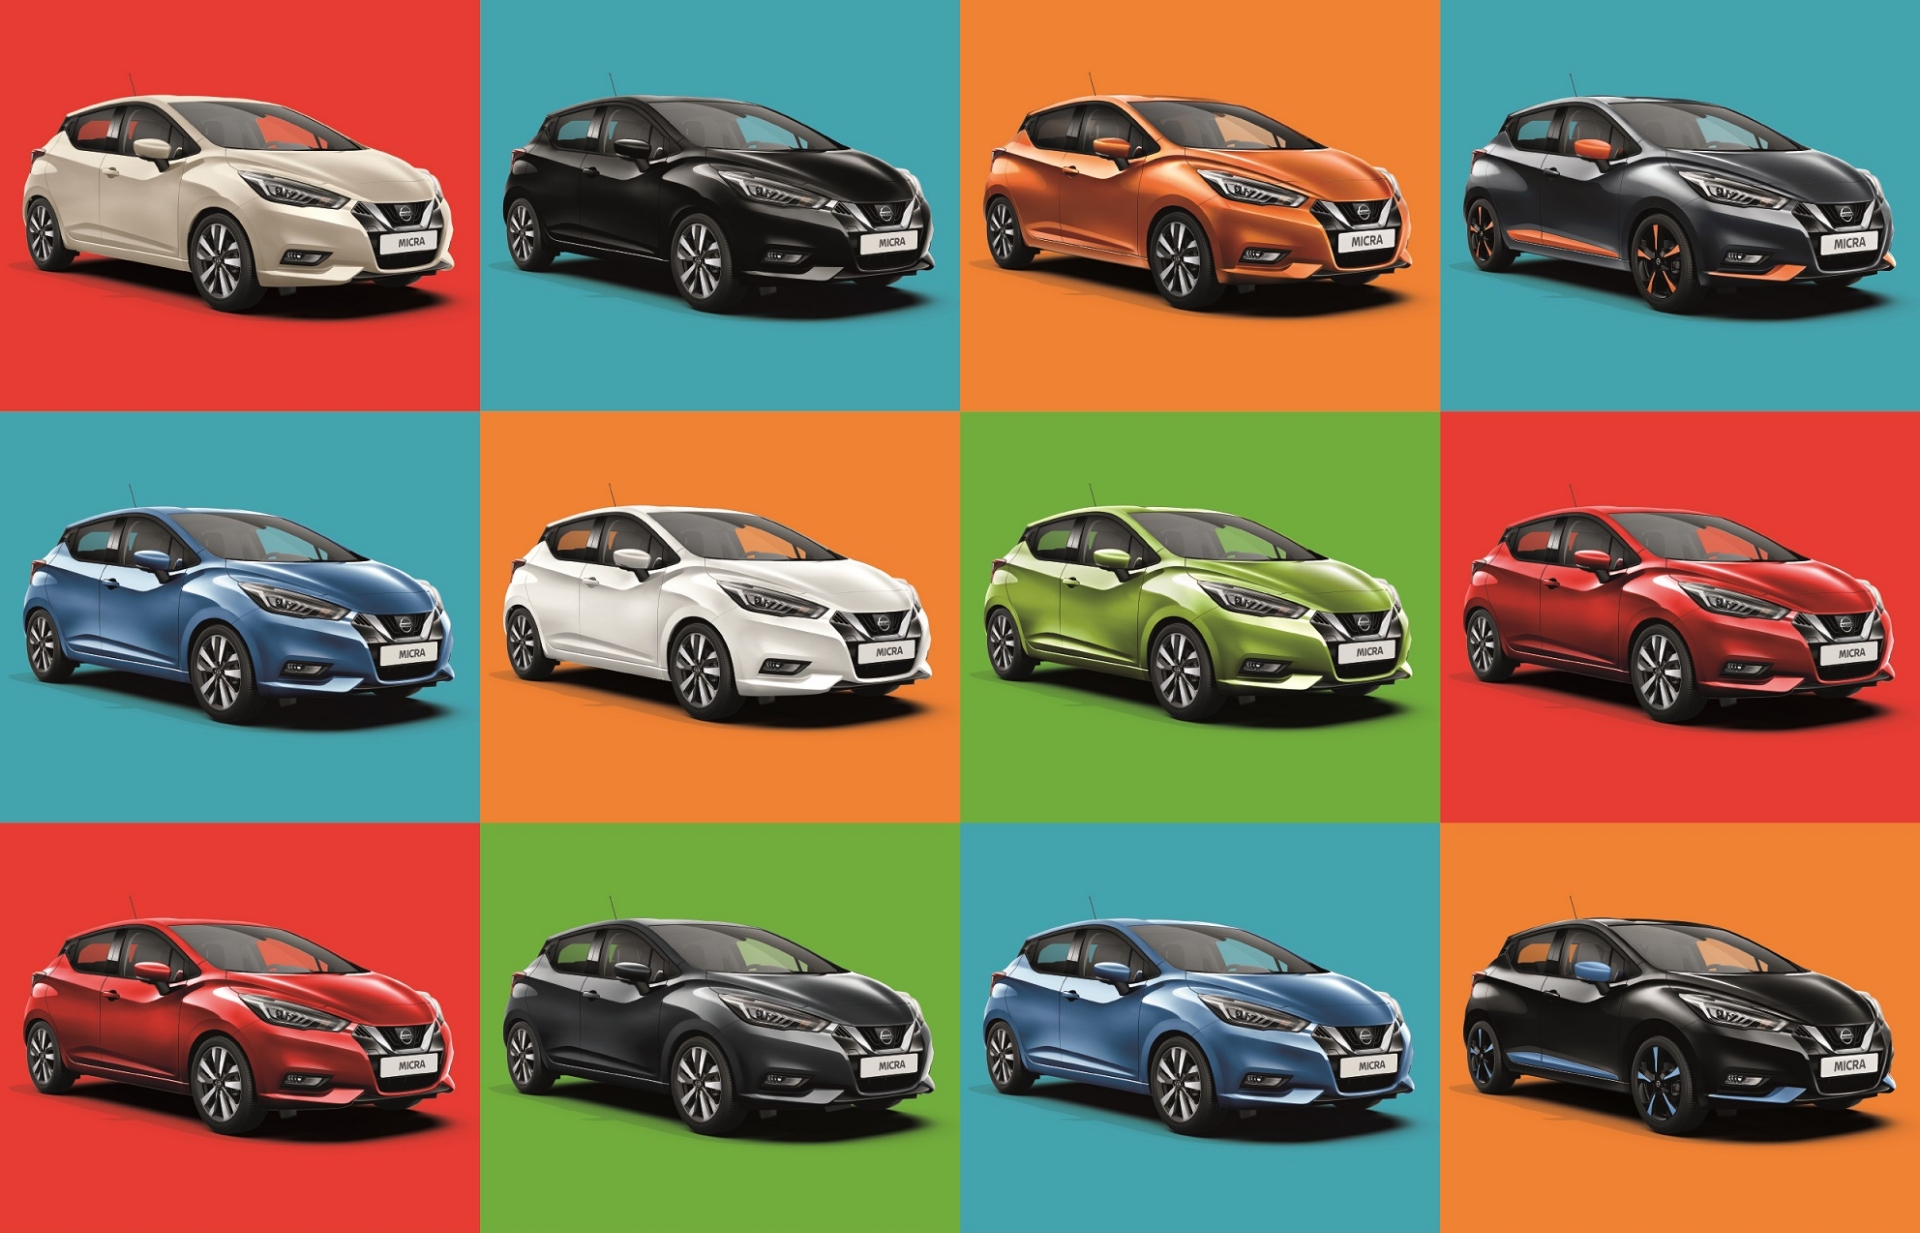 2018 Nissan Micra Psycolourgy Campaign - 86% Choose The Wrong Car Colour For Their Personality